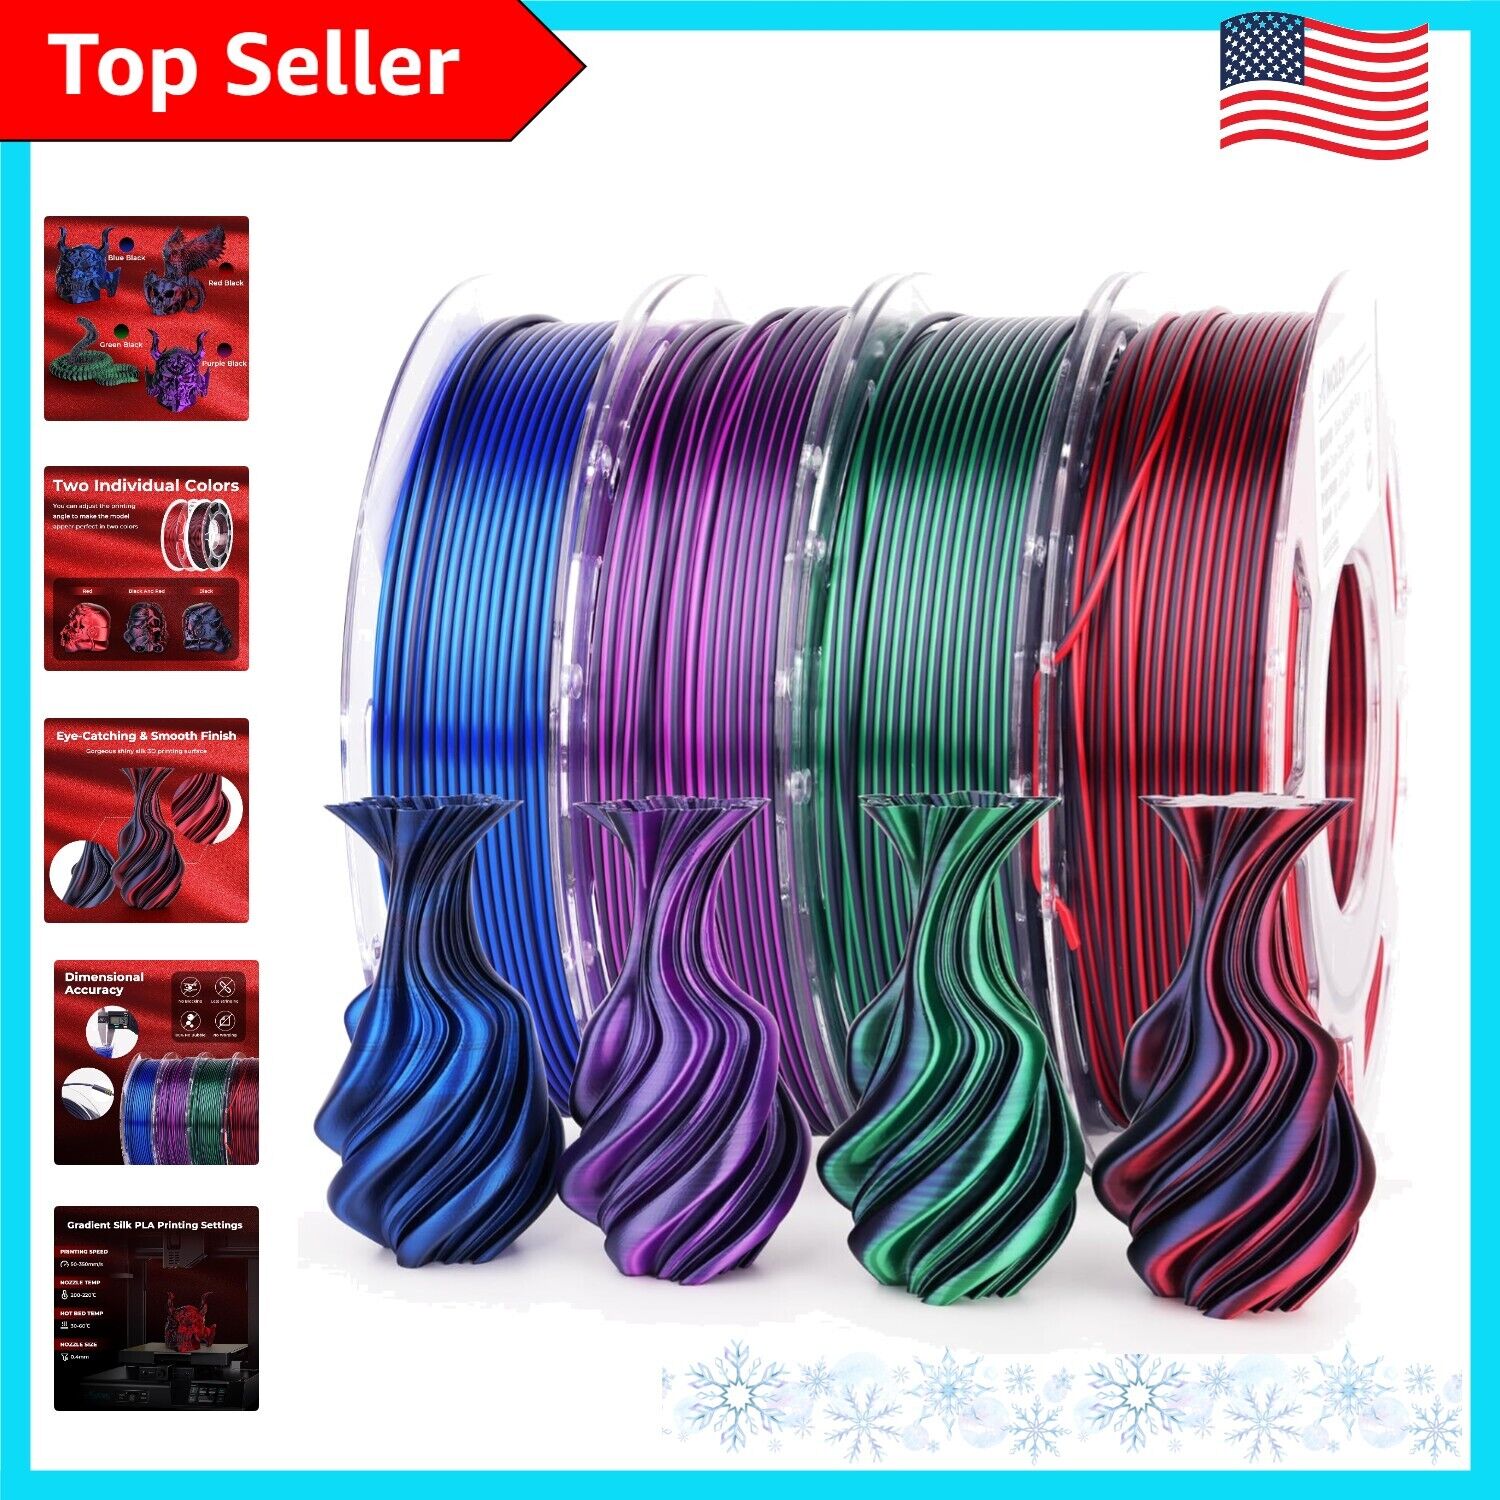 Smooth Silk Black Series PLA Filament Pack - Eye-Catching Color Change Effects